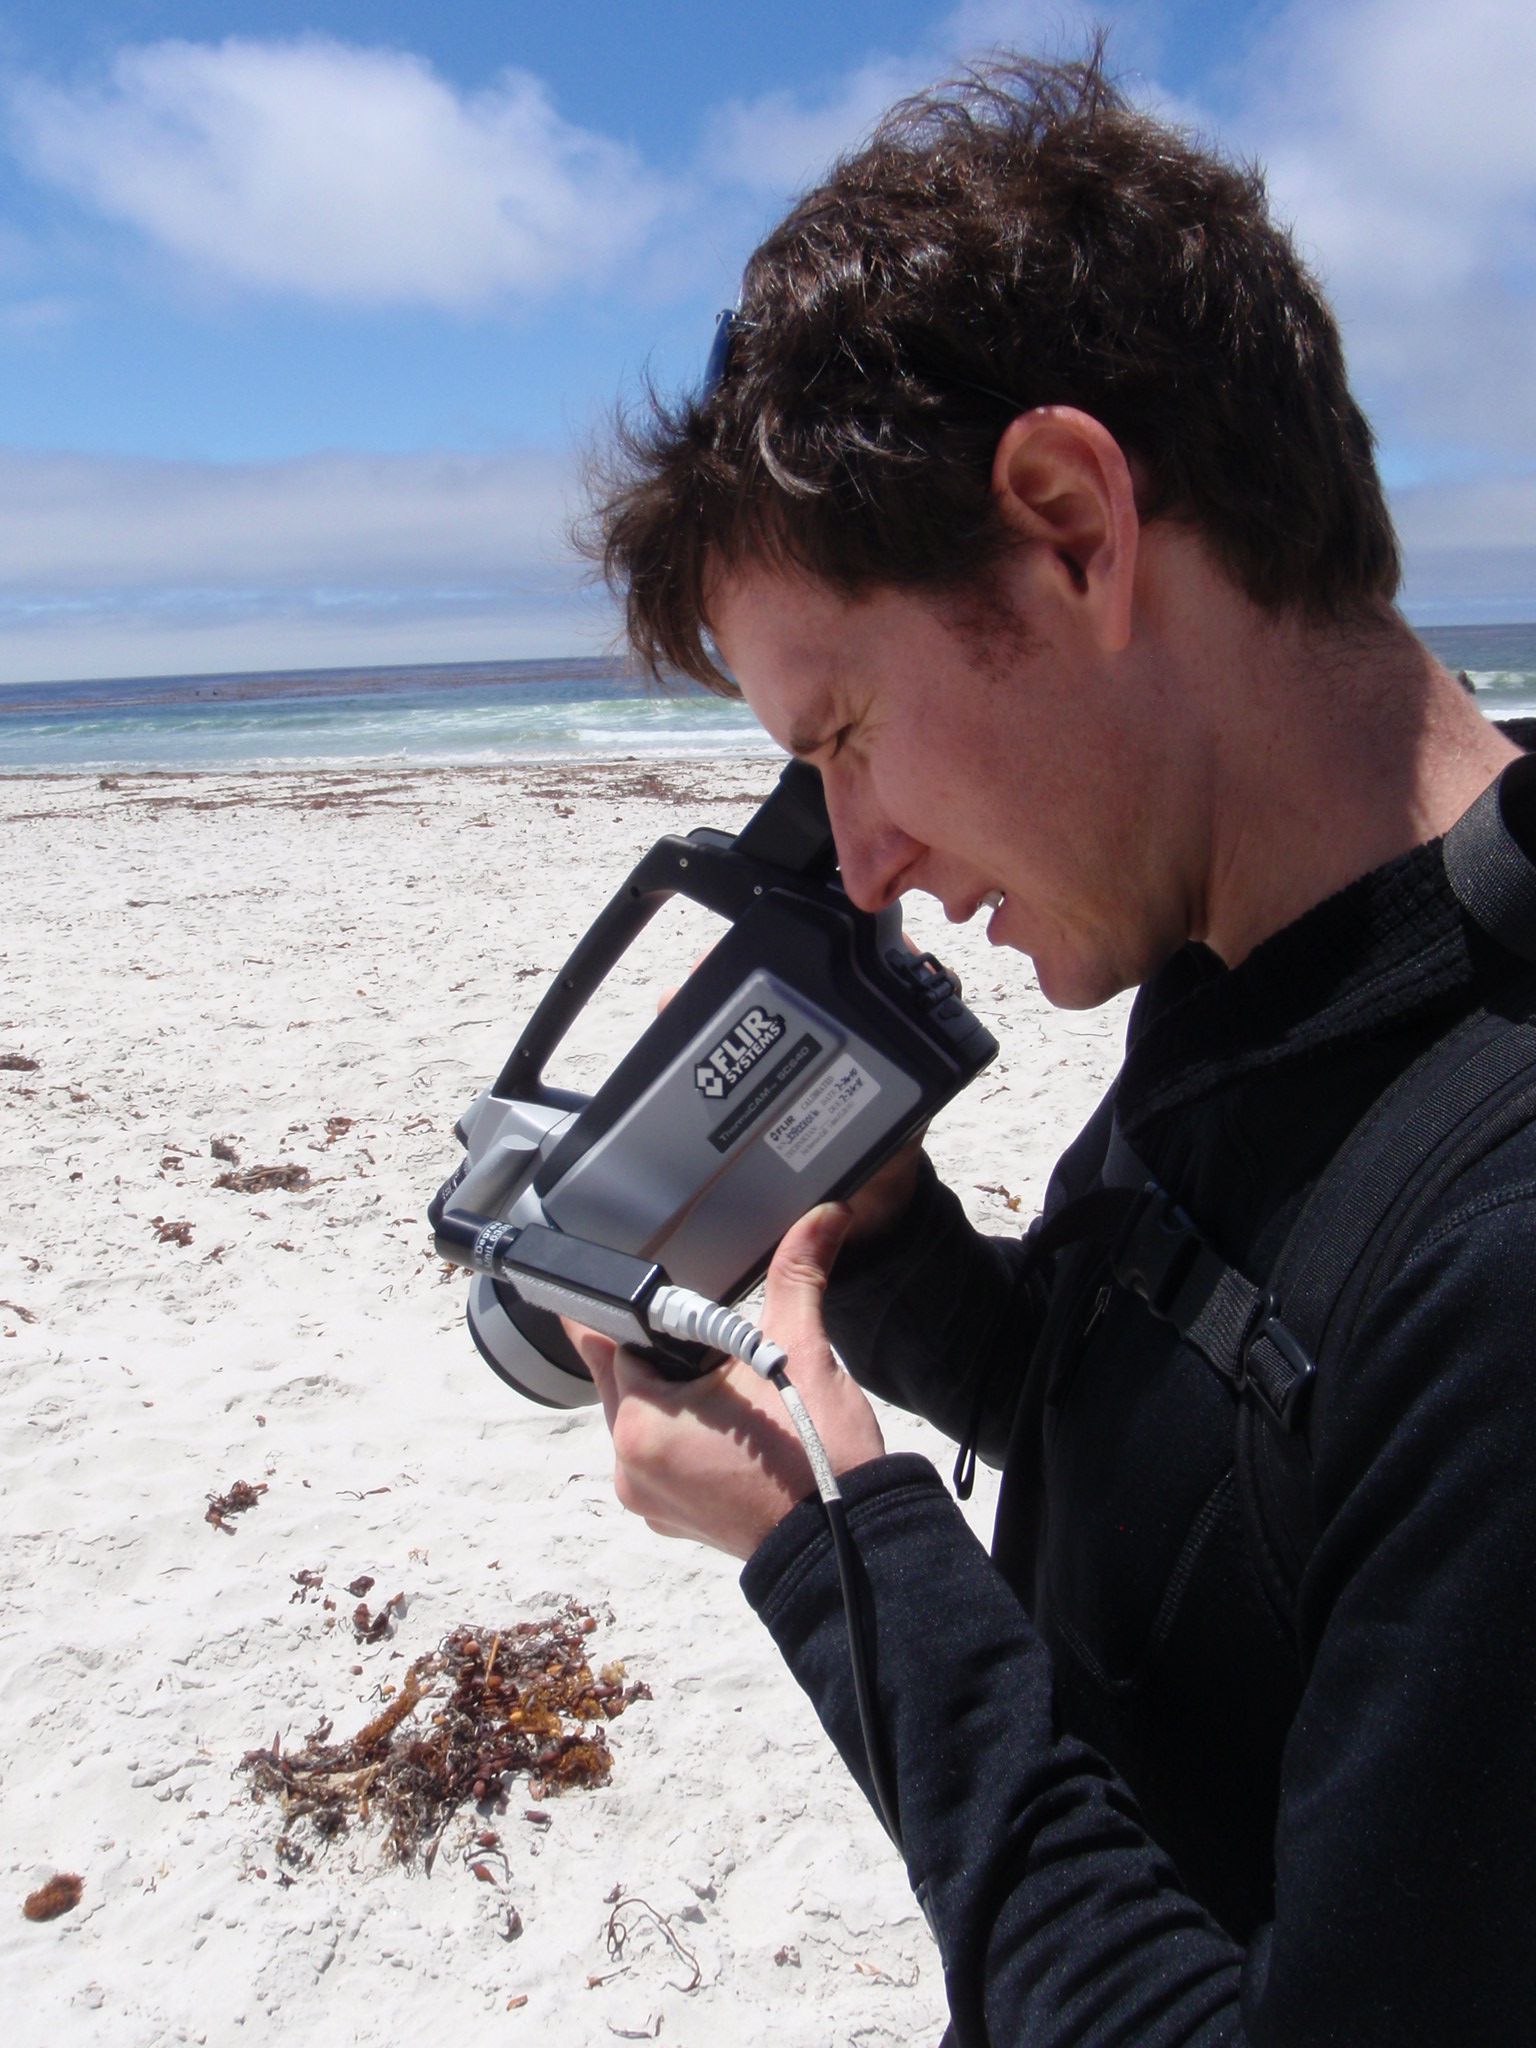 Dr. Chad Brodel uses an infrared camera on a beach in Carmel, CA to determine temperatures as a sensor on an airplane simultaneously collects imagery overhead